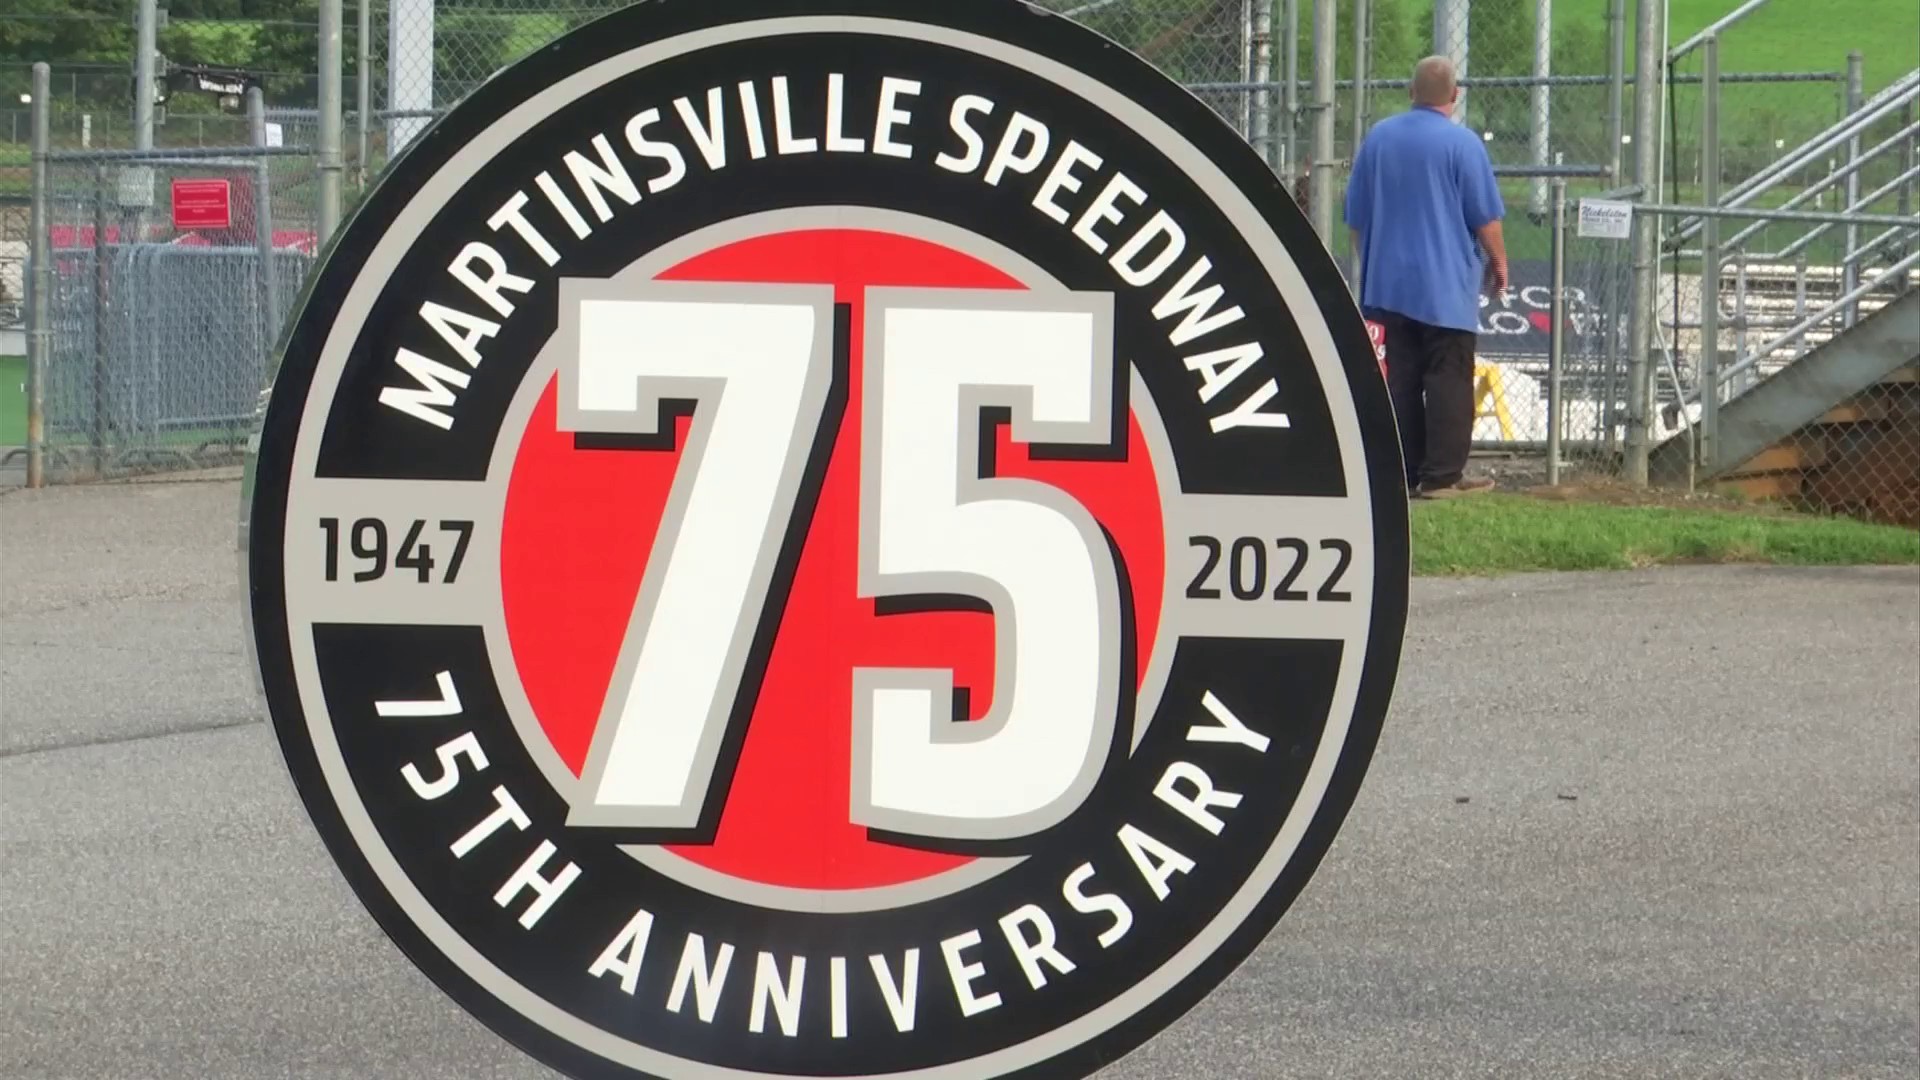 75 years of racing People head to Martinsville Speedway, celebrate track history, share family fun